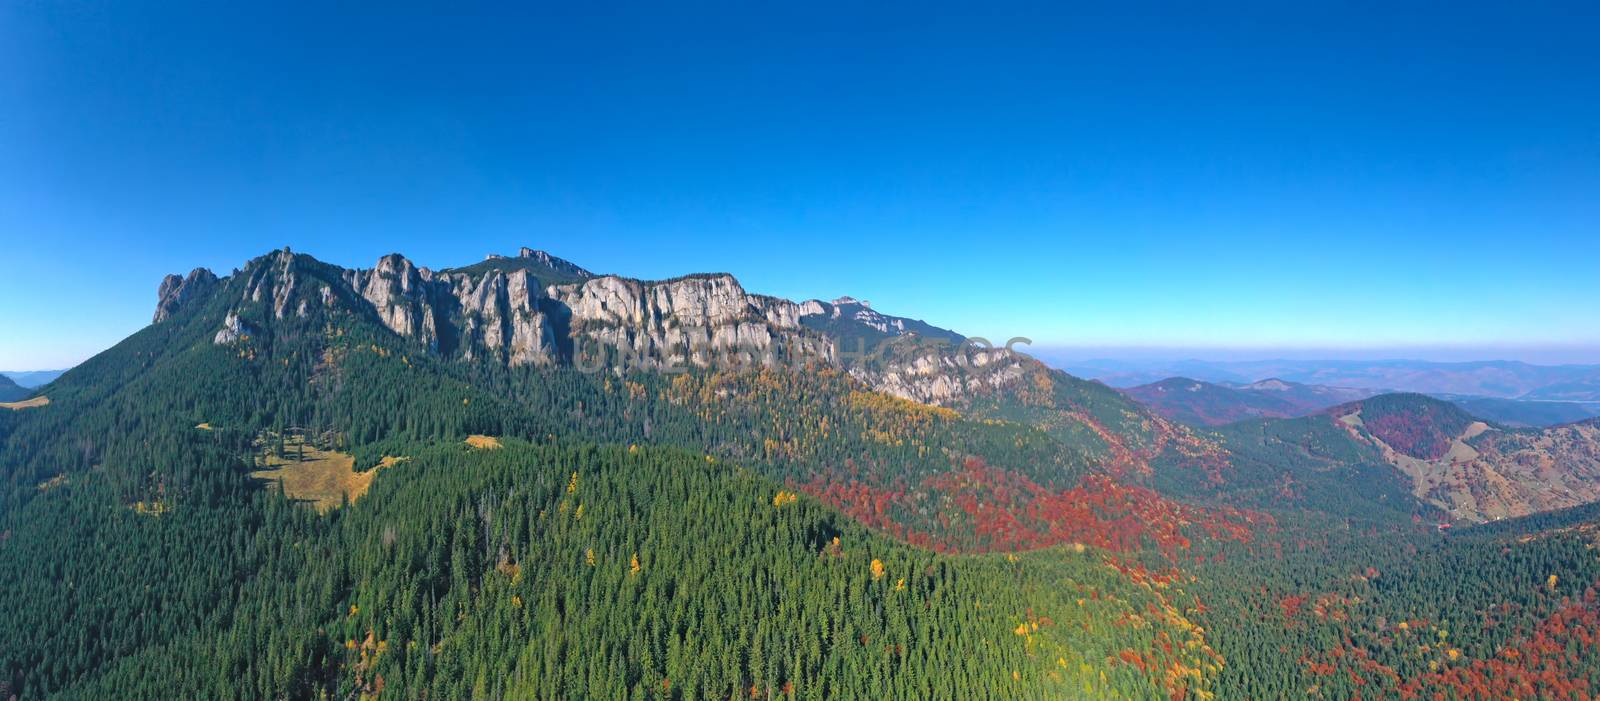 Aerial view of rocky mountain and colored forest in Romanian Carpathians, beautiful autumn landscape